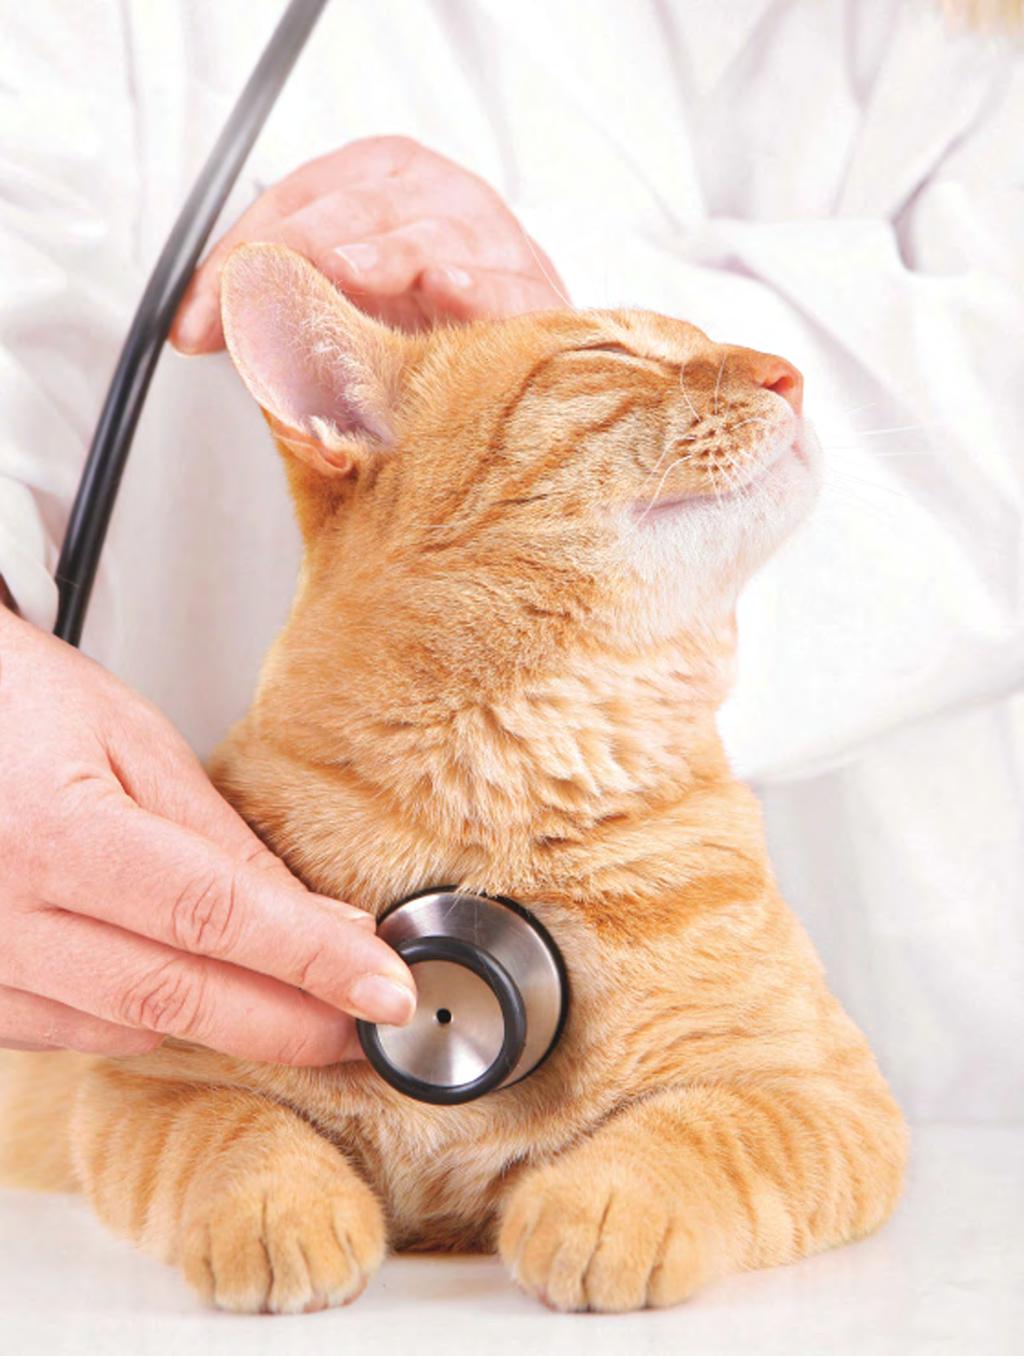 Peer reviewed Cardiac Blood Tests in Cats Another Tool for Detection of Heart Disease Mark A.